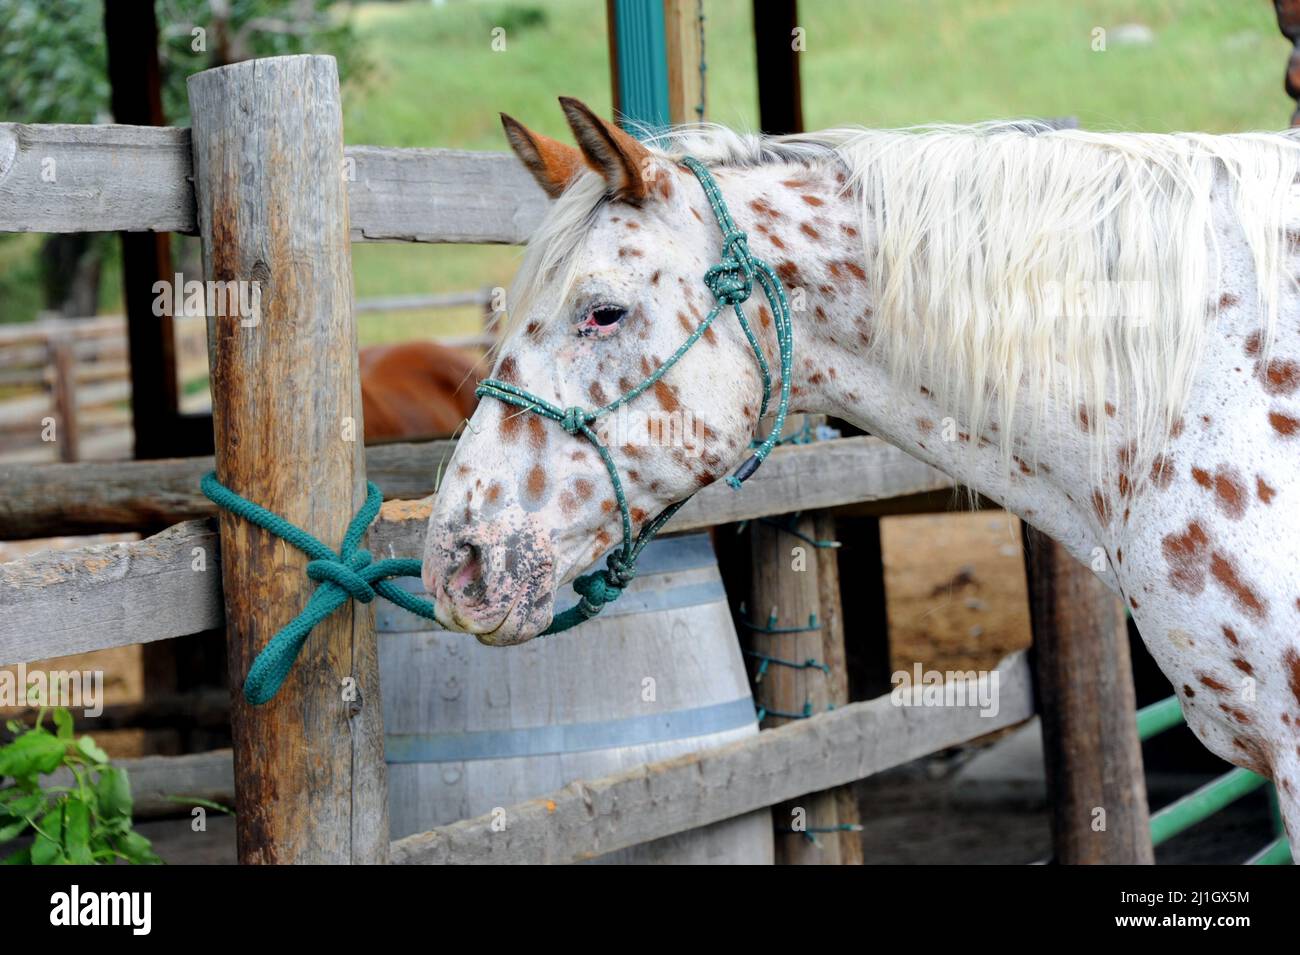 Paint horse stands patiently, tied to a wooden corral pole, for its ridder to return. Stock Photo